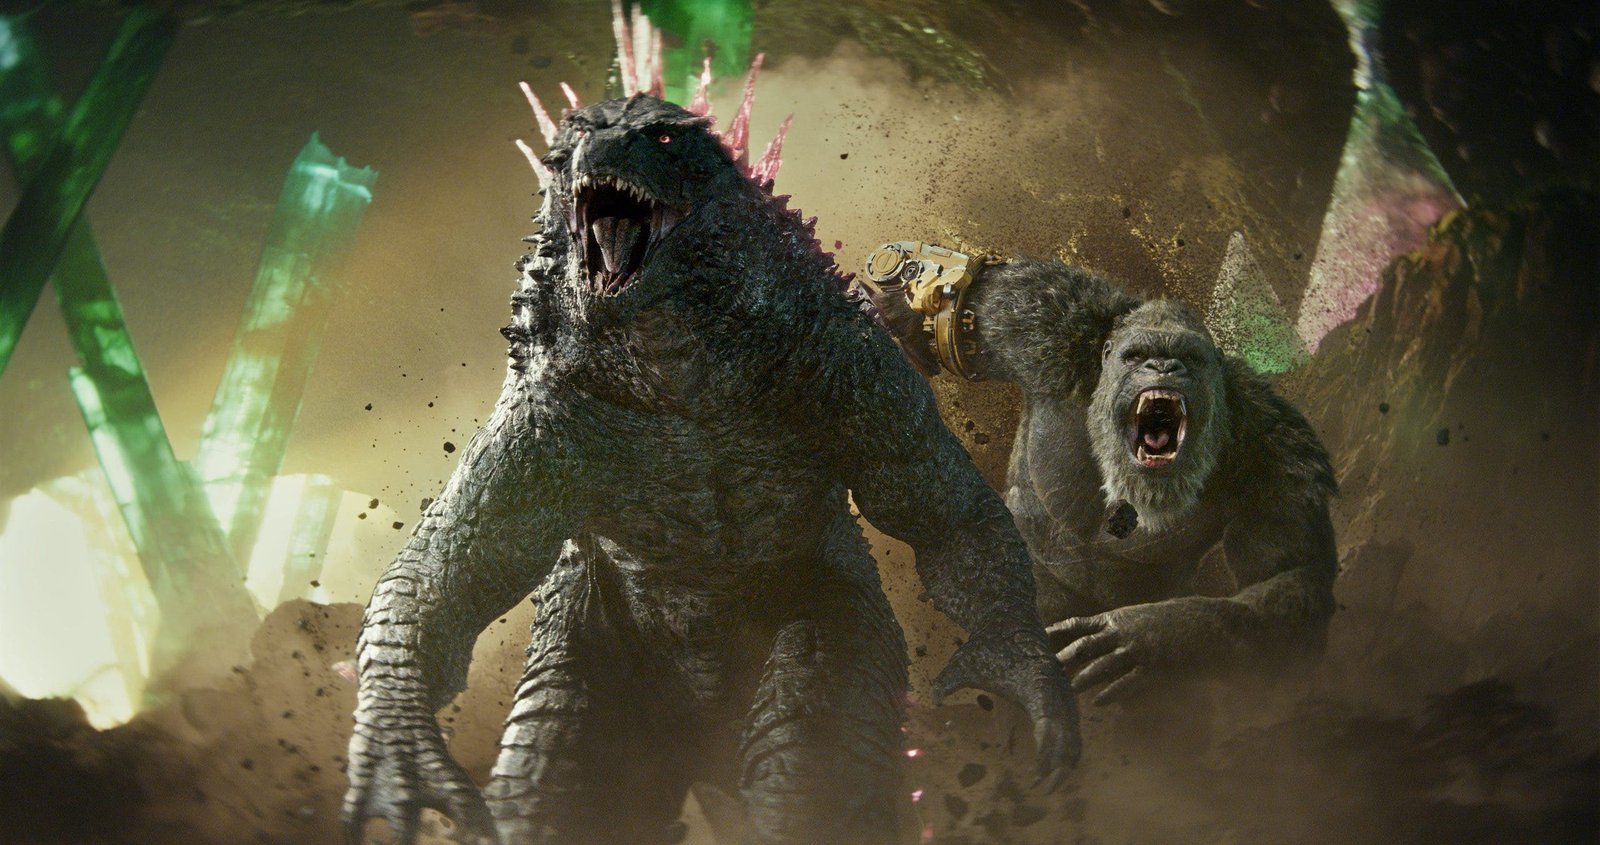 Titans are emerging from Hollow Earth as “Godzilla x Kong: The New Empire” exhibit at the SM Mall of Asia Music Hall, open to the public from March 25 to April 6